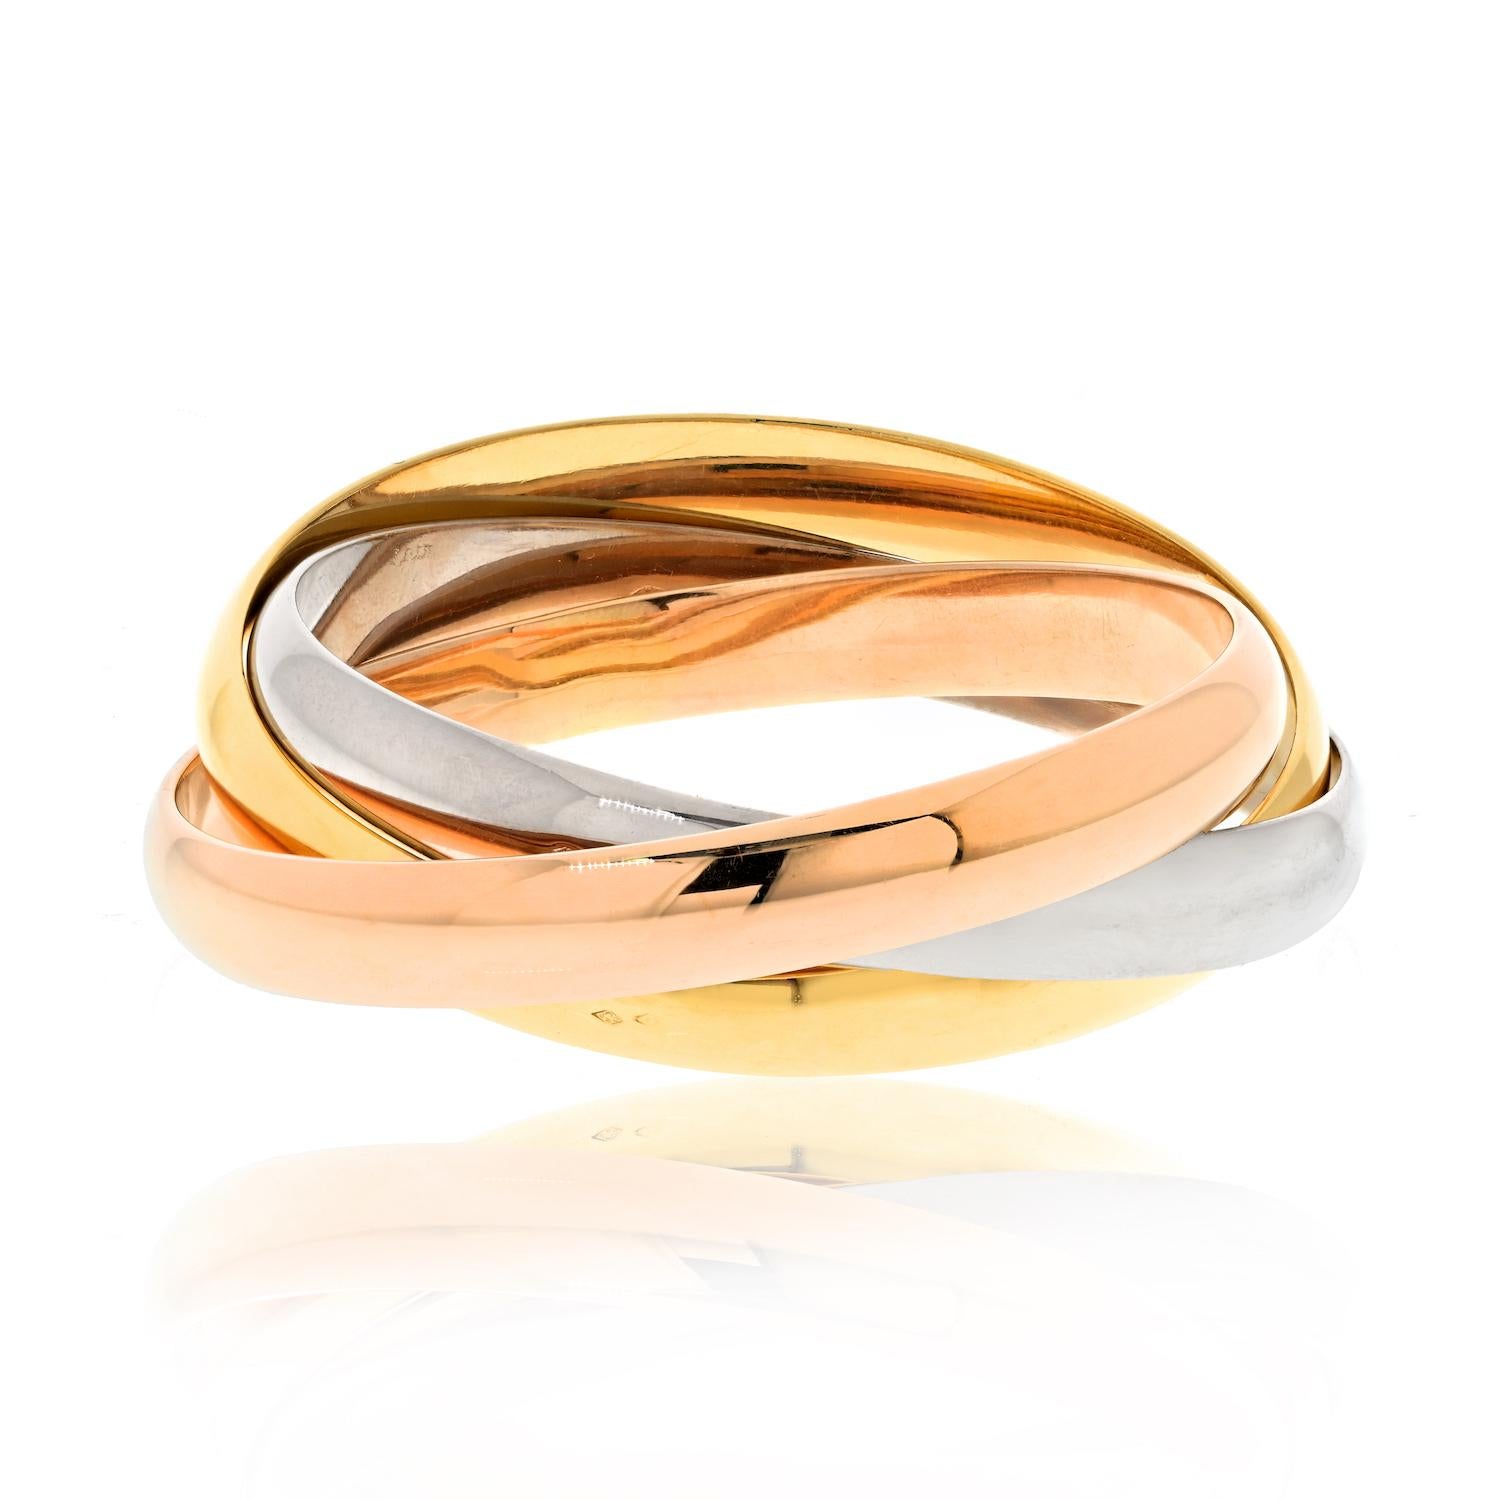 18k Tricolor Gold Trinity Rolling Bangle Bracelet by Cartier.

The 18k Tricolor Gold Trinity Rolling Bangle Bracelet by Cartier is a unique and iconic design. It features three interlocking bands in yellow, white, and rose gold, representing love,